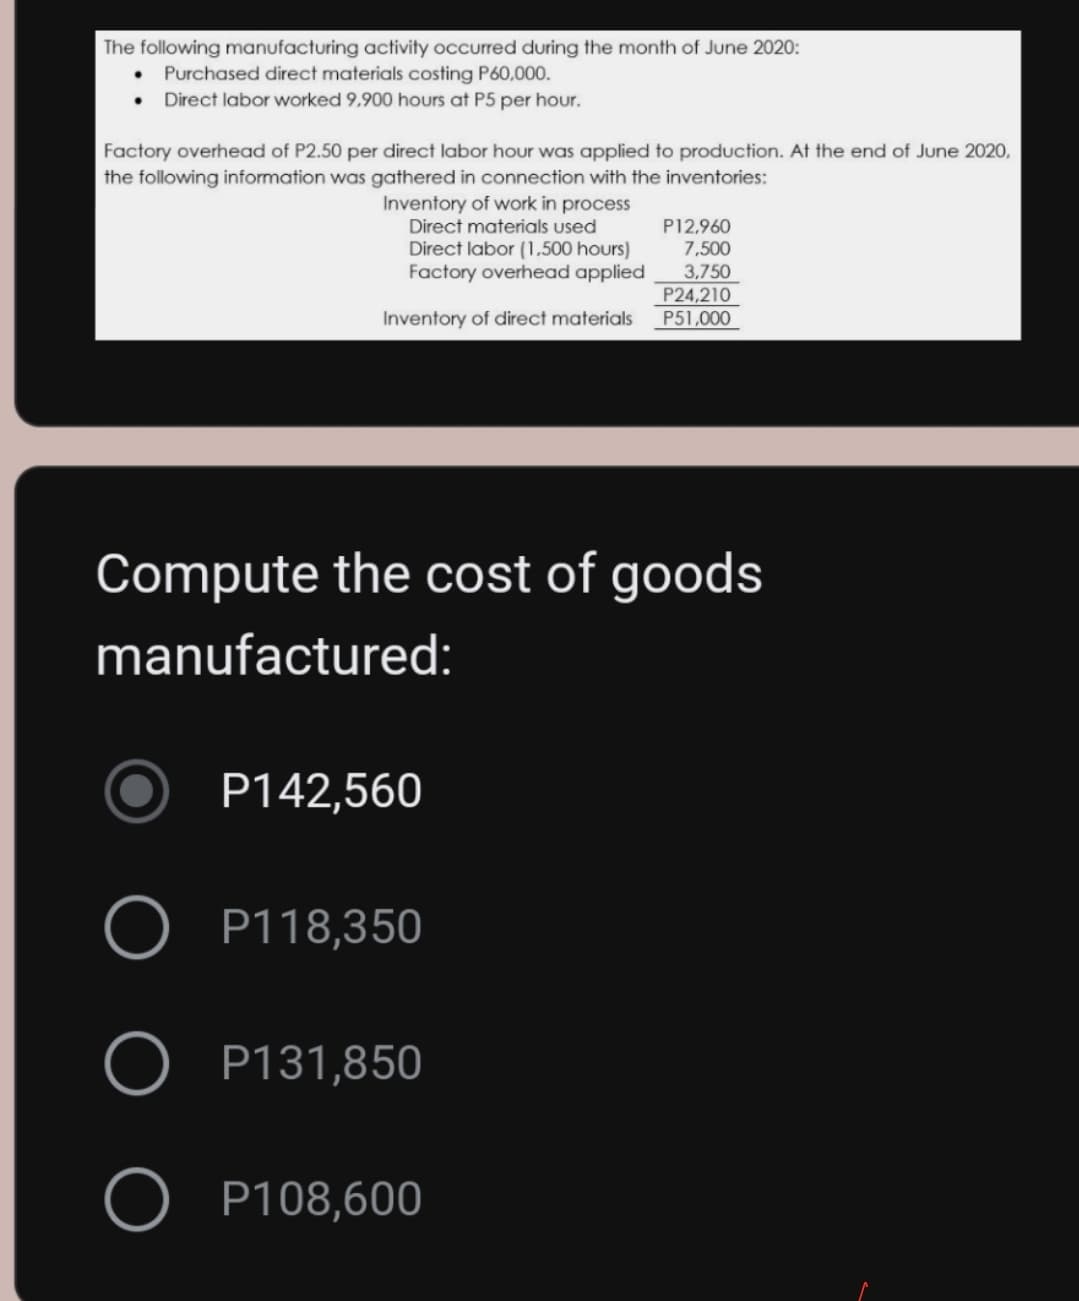 The following manufacturing activity occurred during the month of June 2020:
Purchased direct materials costing P60,000.
Direct labor worked 9,900 hours at P5 per hour.
Factory overhead of P2.50 per direct labor hour was applied to production. At the end of June 2020,
the following information was gathered in connection with the inventories:
Inventory of work in process
Direct materials used
P12.960
7,500
Direct labor (1,500 hours)
Factory overhead applied
3,750
P24,210
P51,000
Inventory of direct materials
Compute the cost of goods
manufactured:
P142,560
O P118,350
P131,850
P108,600
